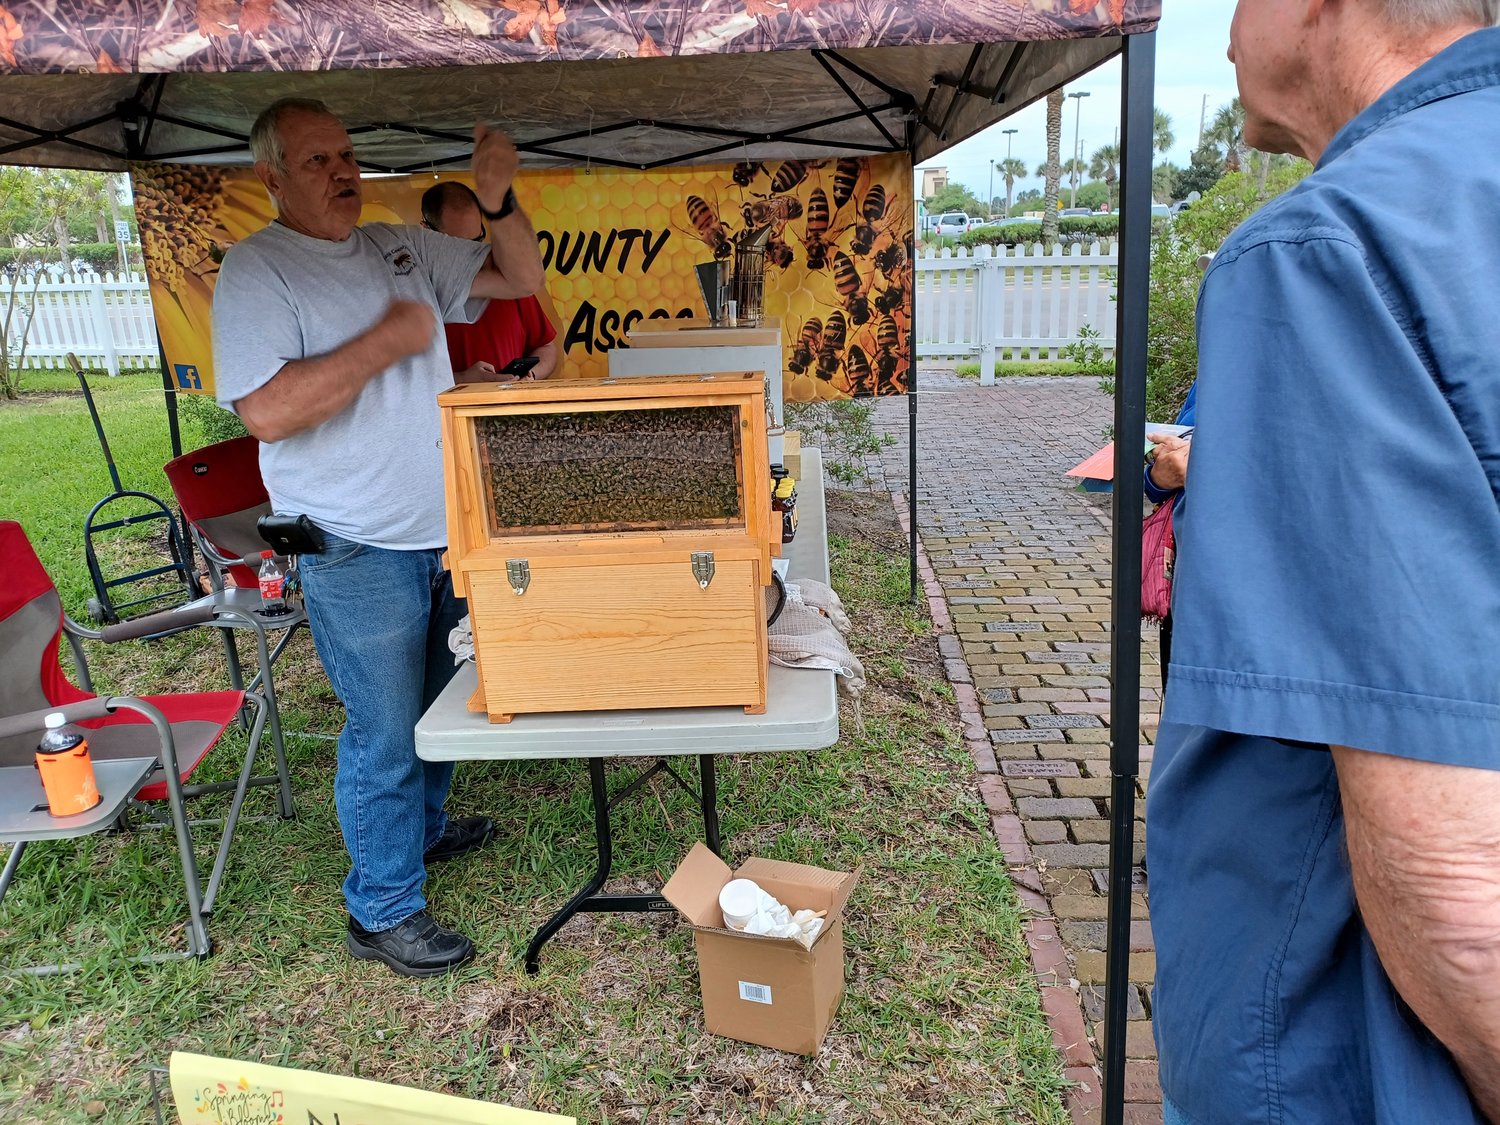 John Boeckstiegel of J&L Apiaries talks about beekeeping and honey production during the Beaches Museum’s “Springing the Blooms” event.